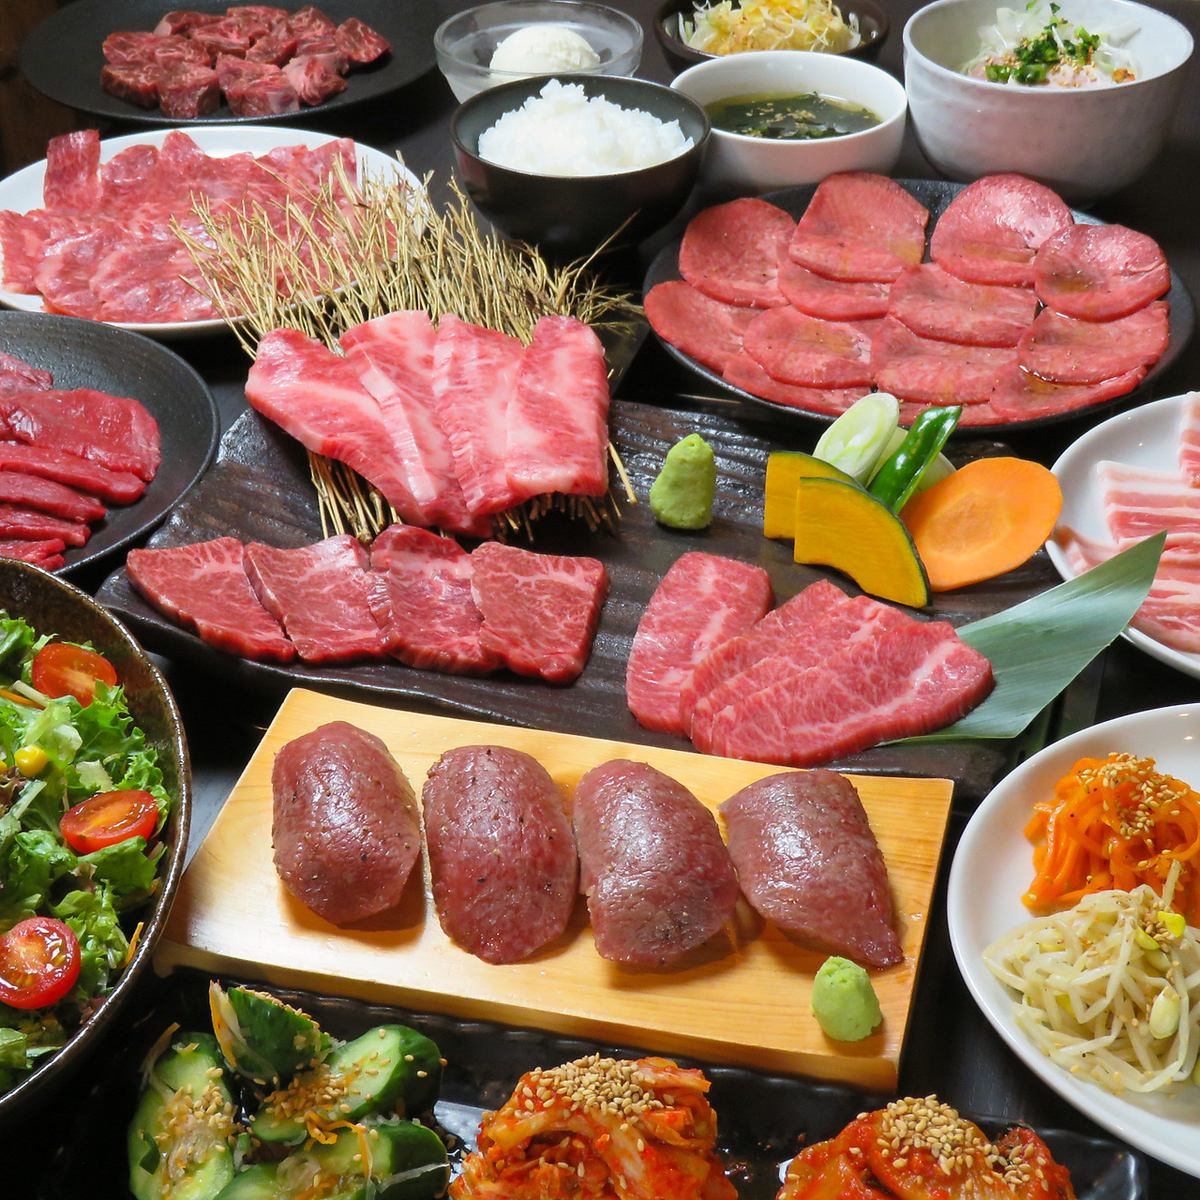 You can enjoy high-quality meat at an affordable price.